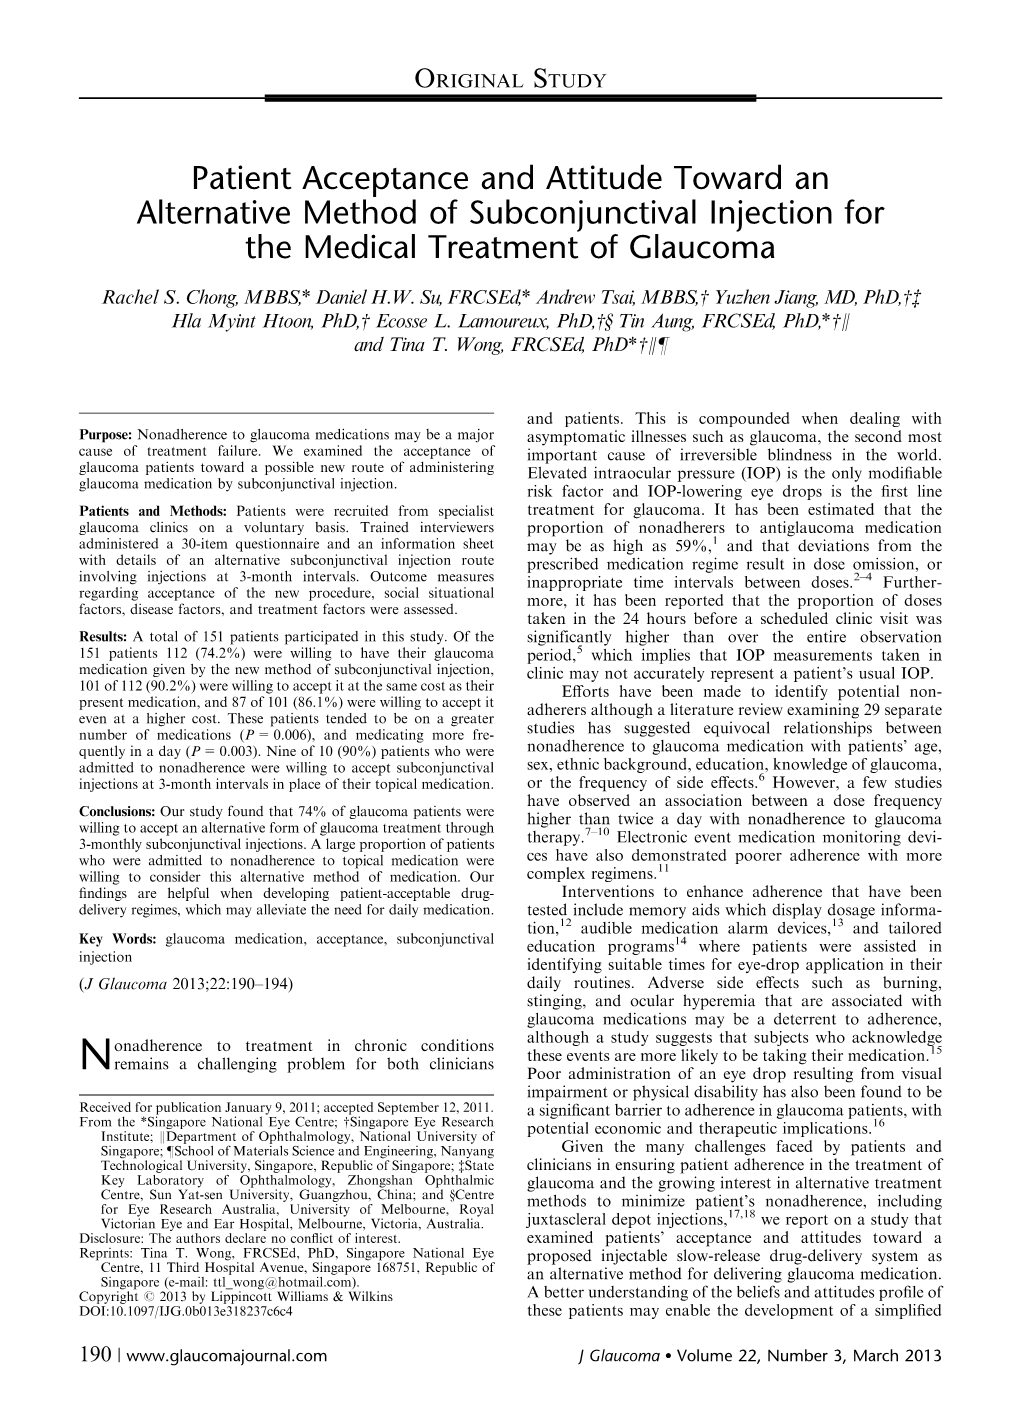 Patient Acceptance and Attitude Toward an Alternative Method of Subconjunctival Injection for the Medical Treatment of Glaucoma